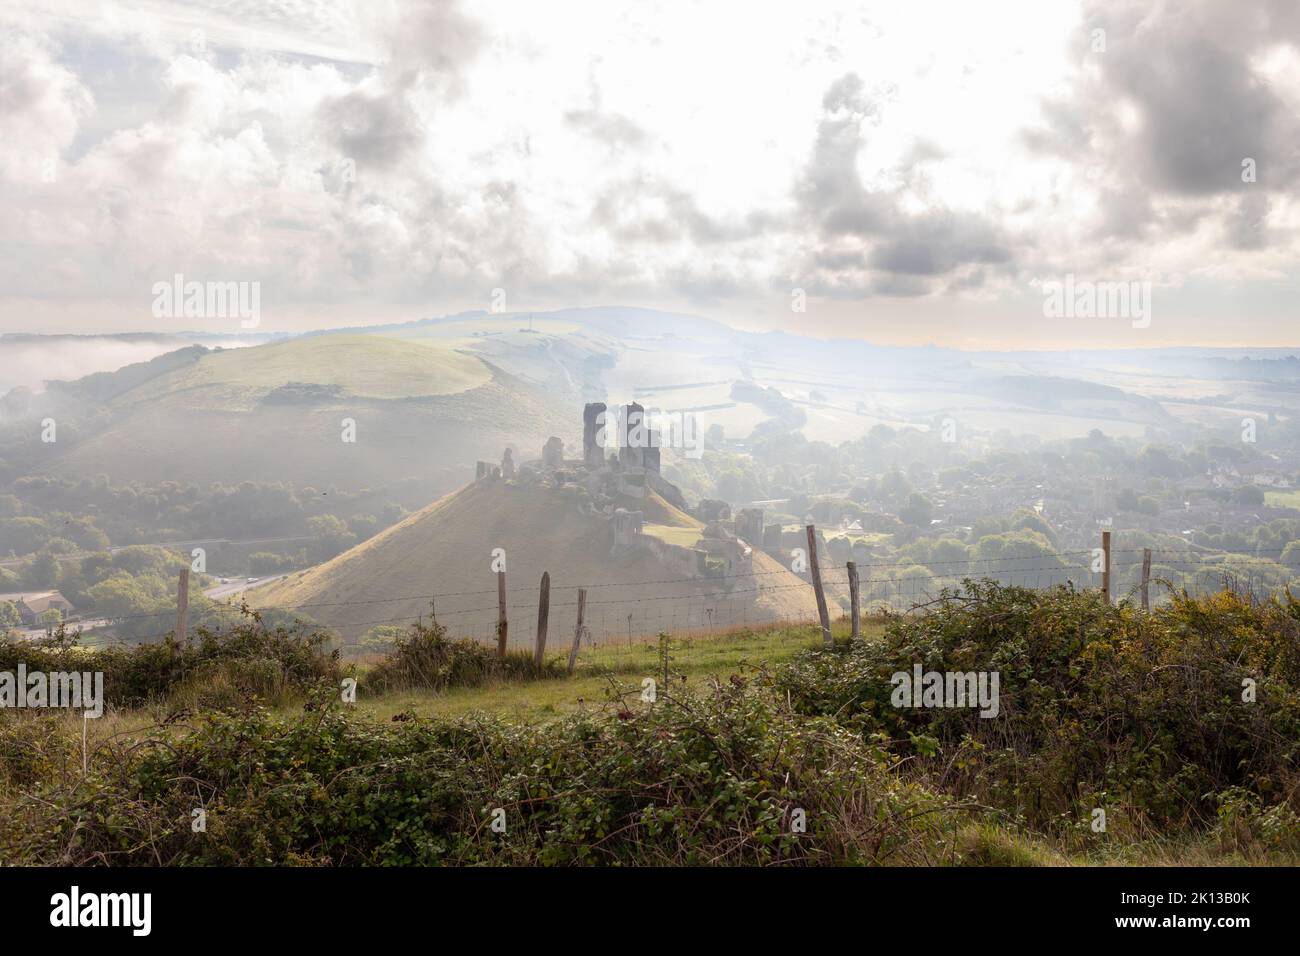 Misty morning view of Corfe Castle in the Isle of Purbeck, Dorset, England Stock Photo